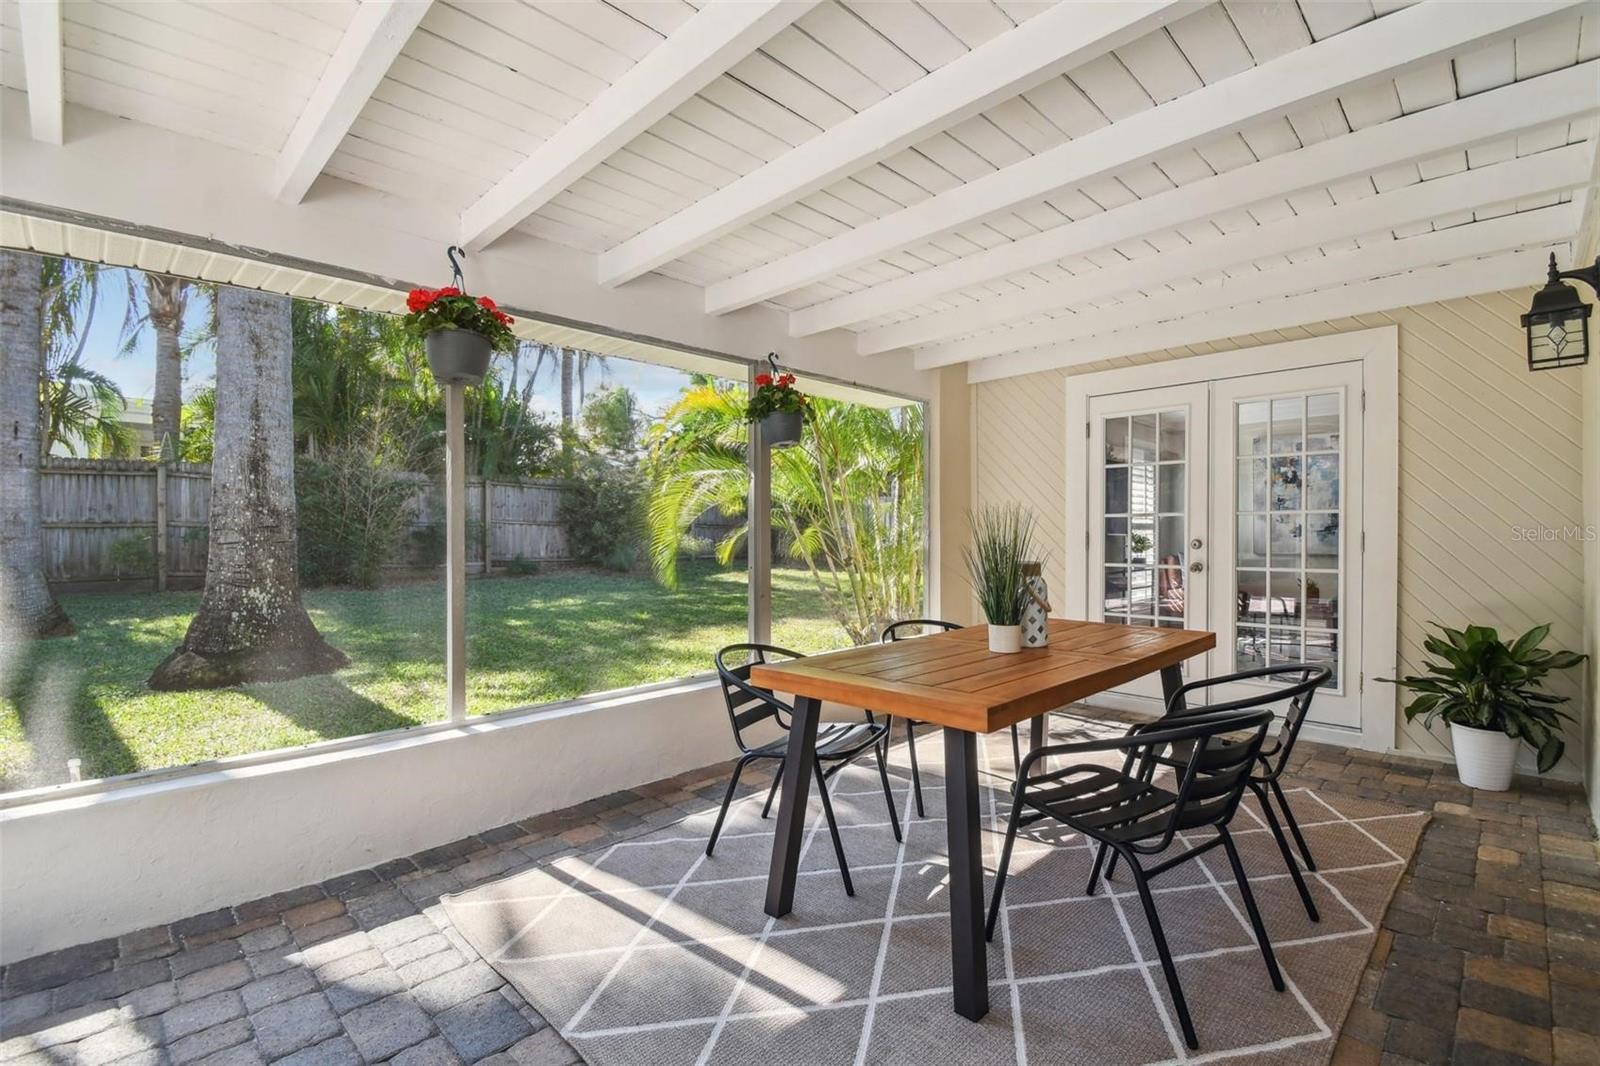 Large, Screened Patio for Outdoor Entertaining